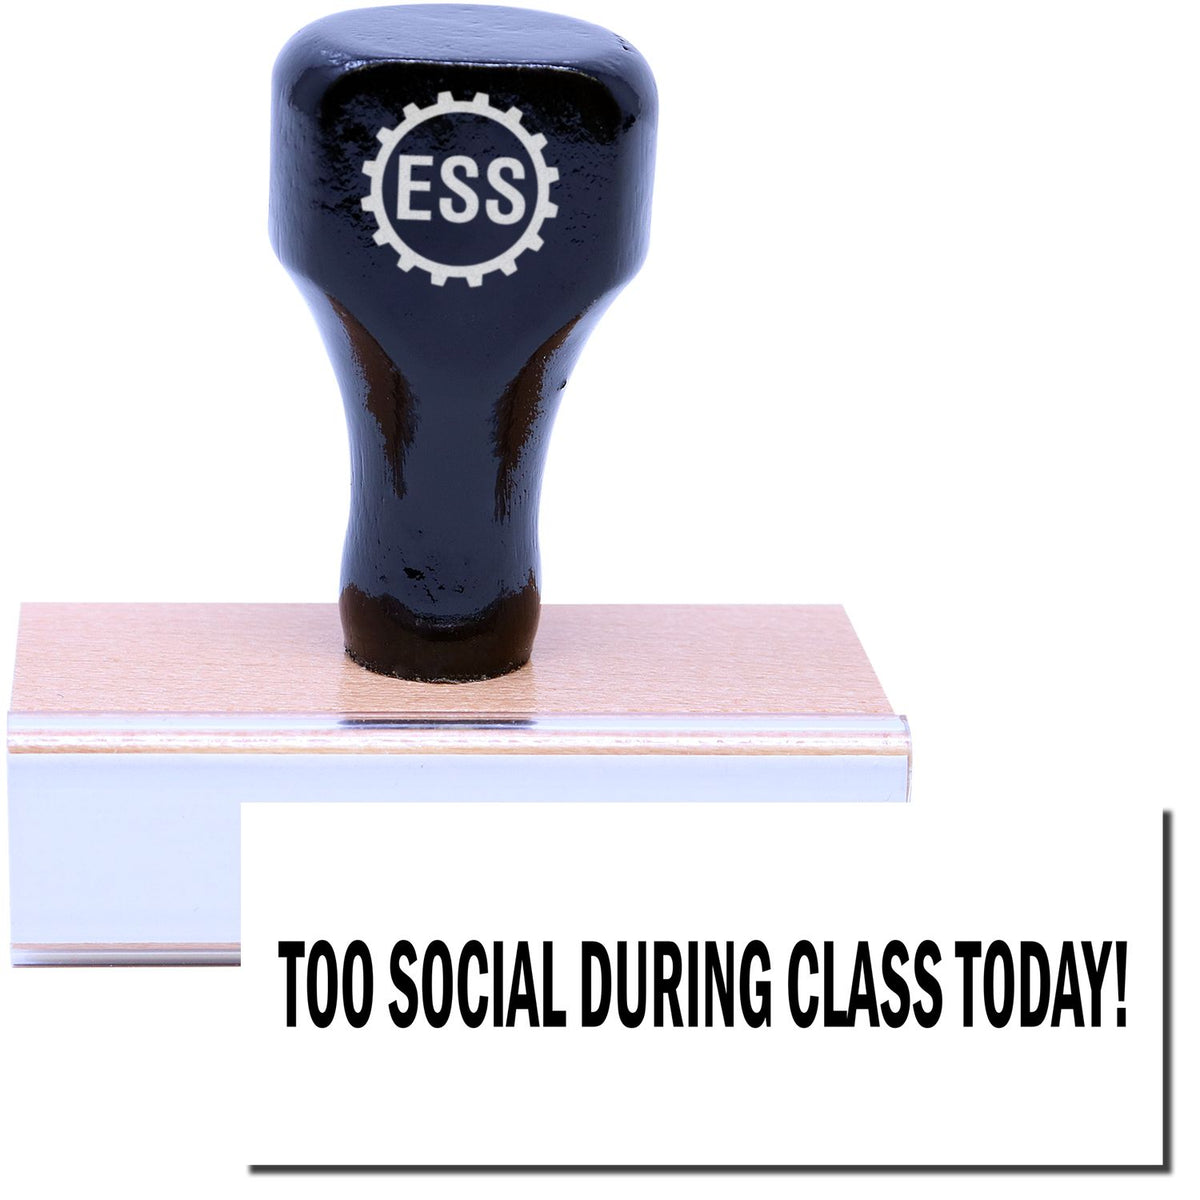 A stock office rubber stamp with a stamped image showing how the text &quot;TOO SOCIAL DURING CLASS TODAY!&quot; is displayed after stamping.